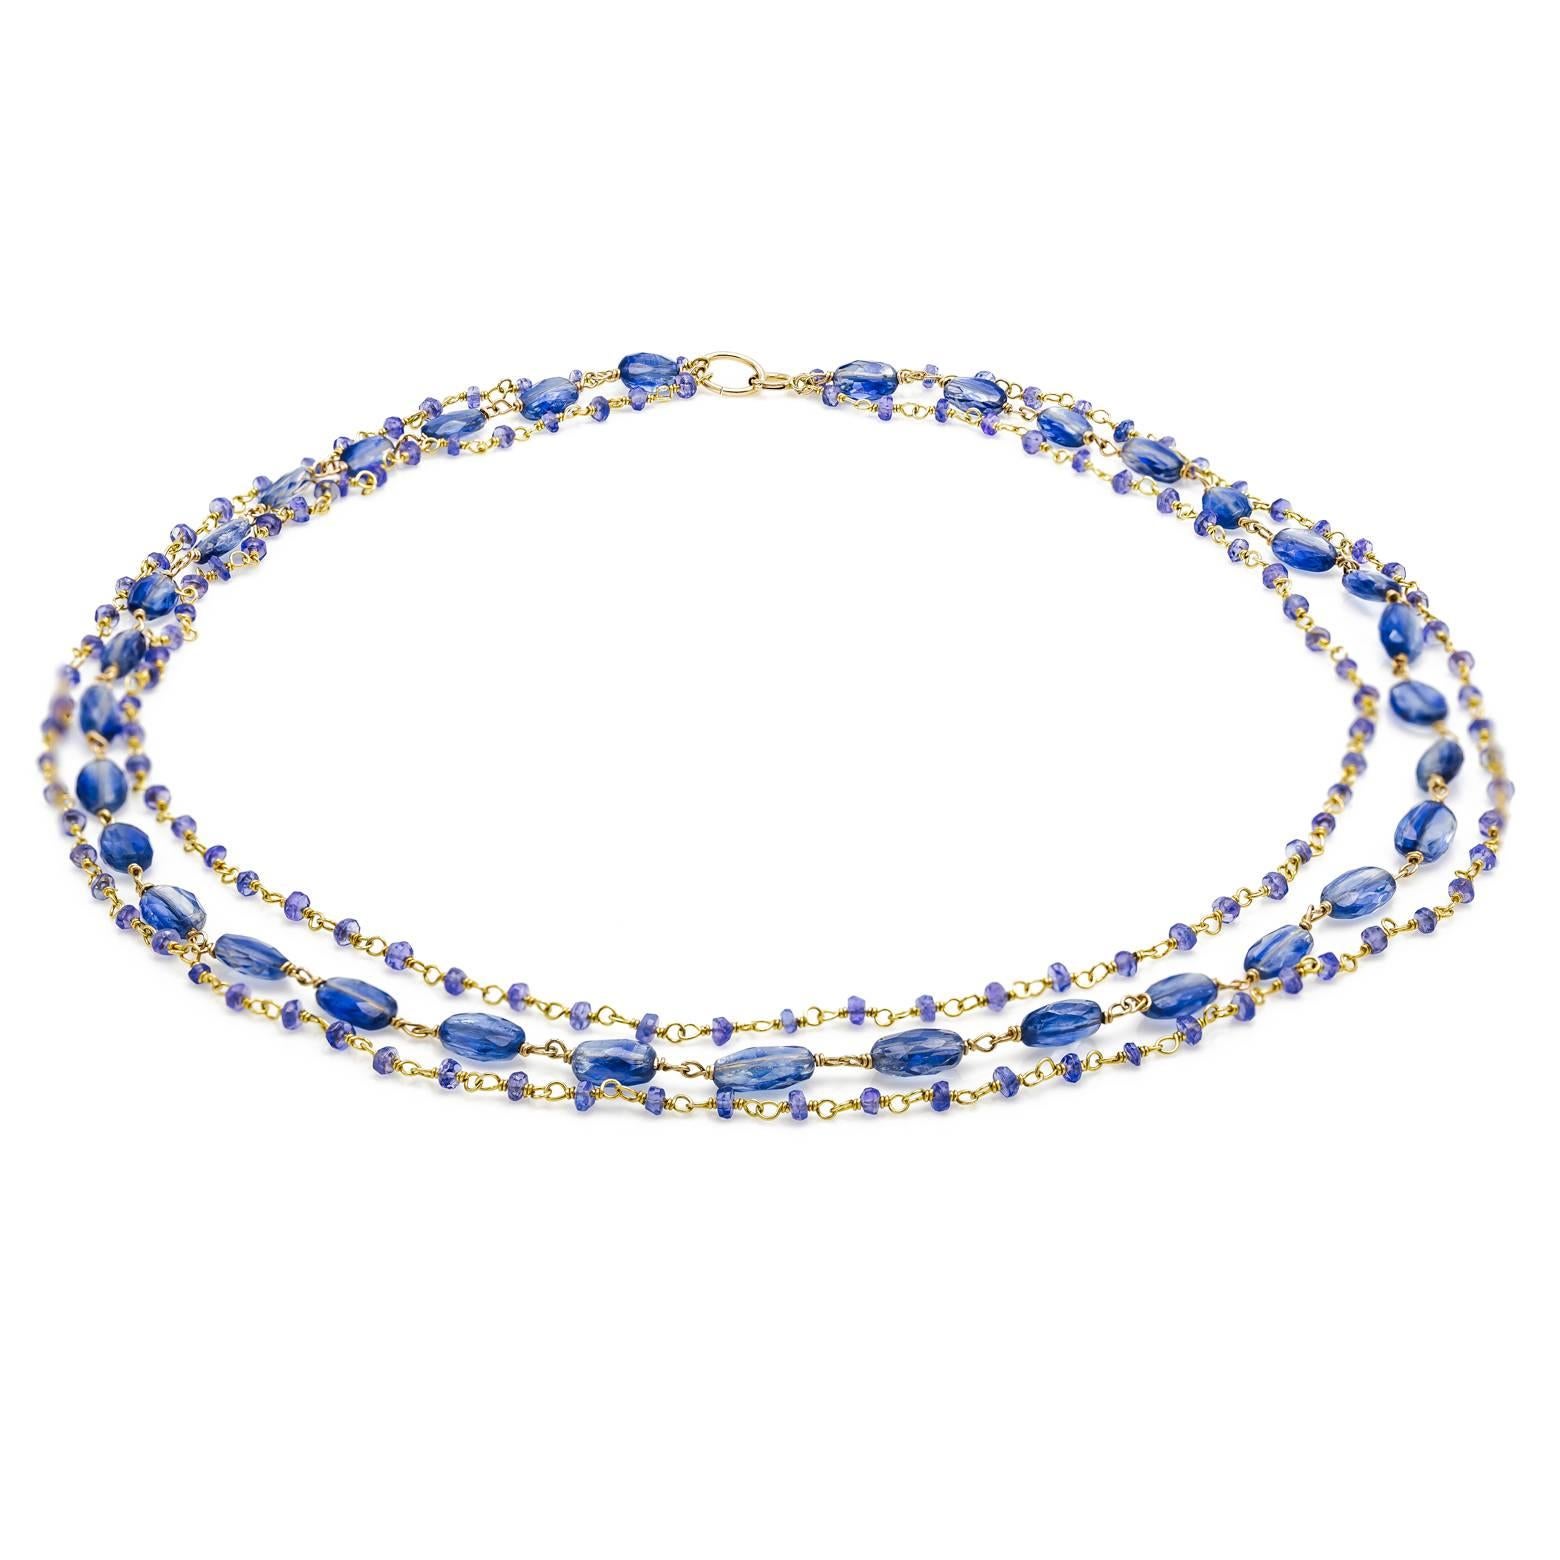 Delicate and artistic this intriguing necklace is made of 3 strands of indigo tanzanites and kyanites. The largest strand has 33 oval faceted kyanite beads. Easily dressed up and fun enough to wear everyday the deep ocean blue is calming and adds